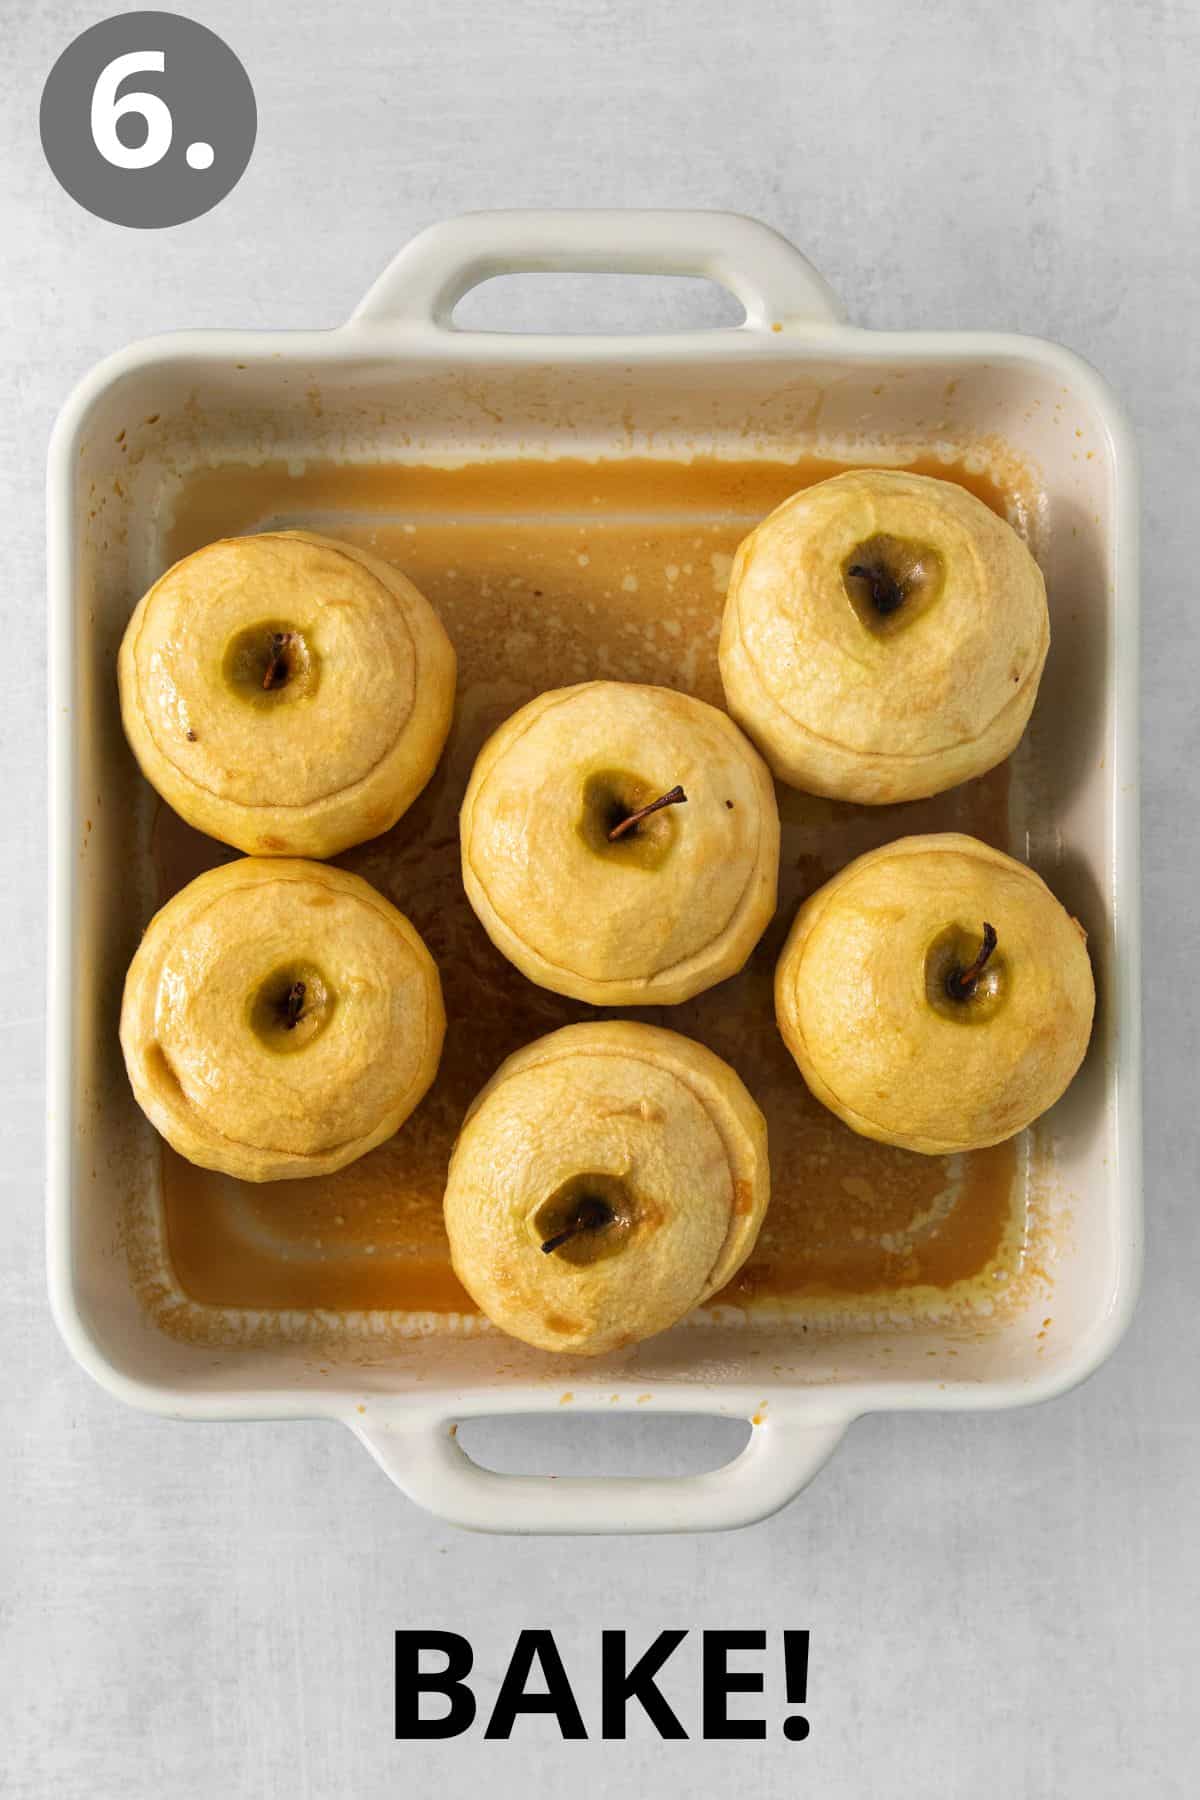 Baked apples in a dish